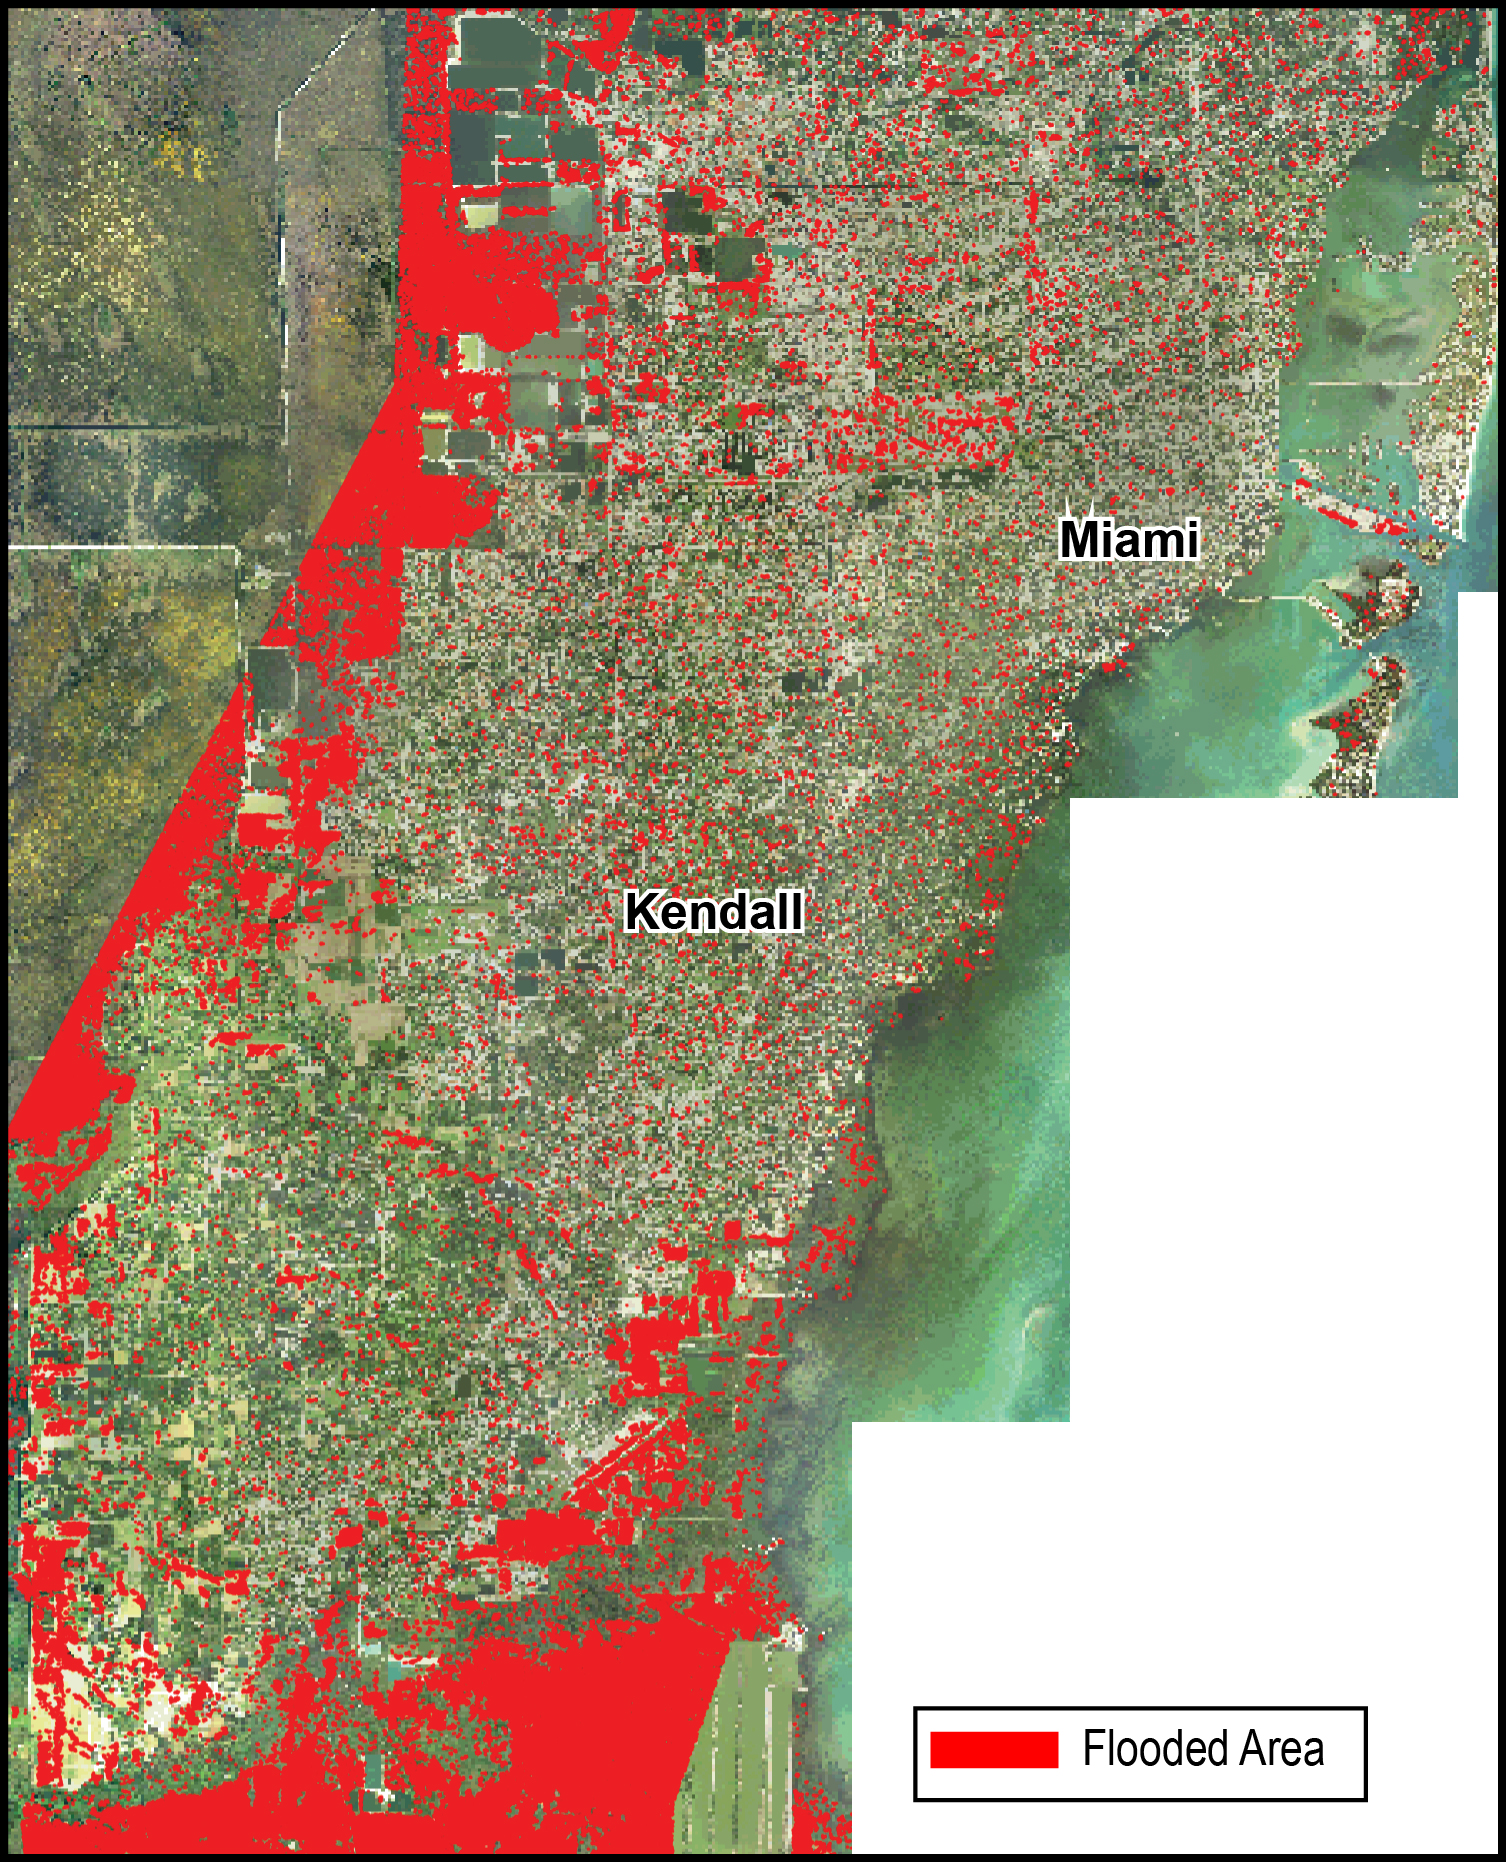 A map showing areas flooded in Florida after Hurricane Irma